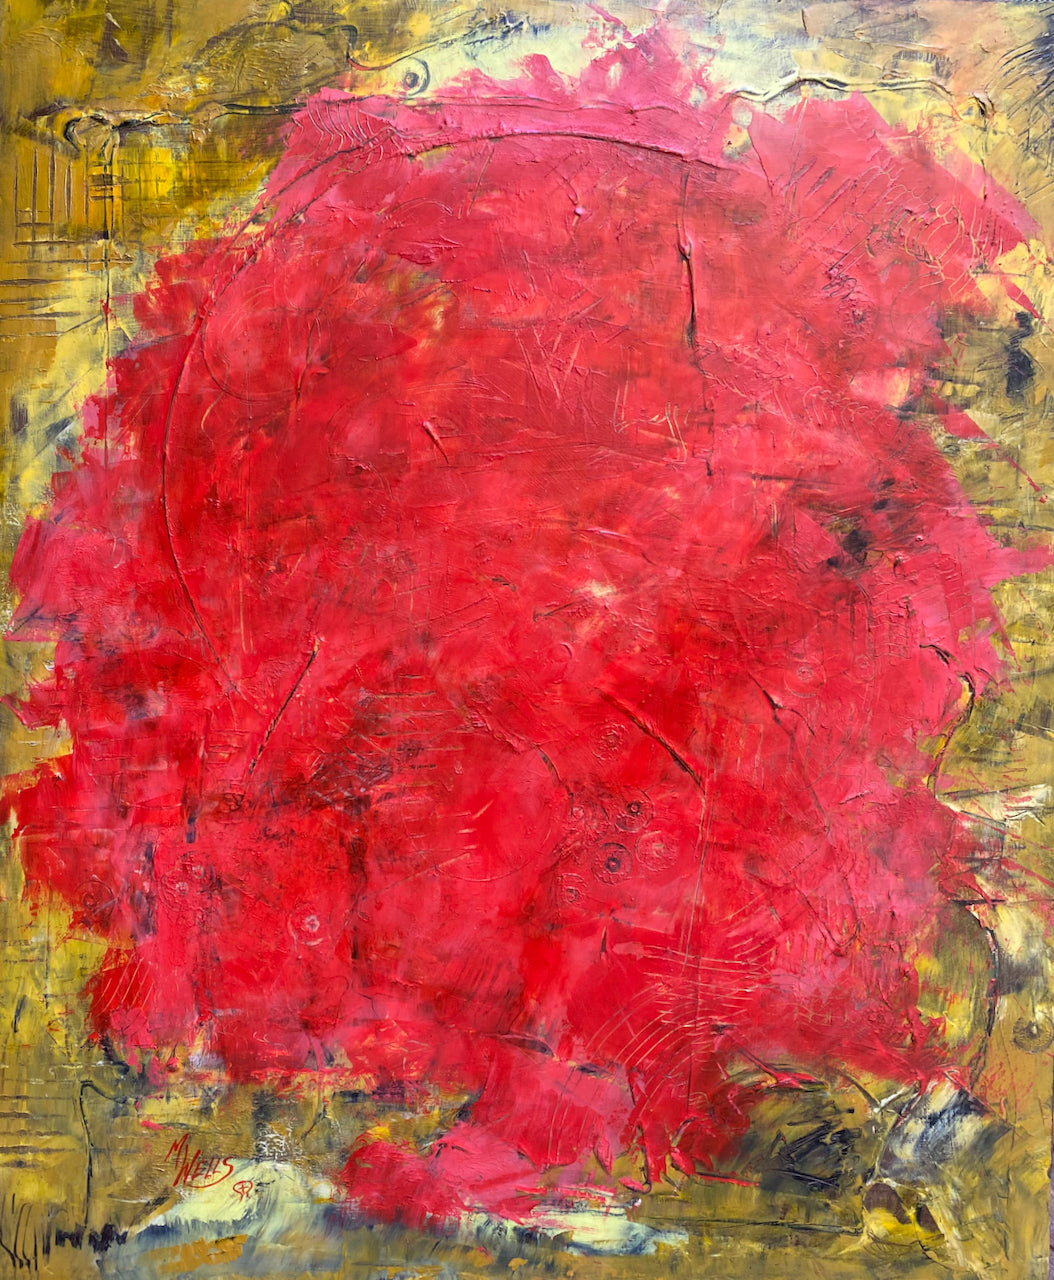 “Power Burst - Origins of Woman 2” - Oil & Cold Wax Painting by Marilyn Wells, texture, reds and golds.